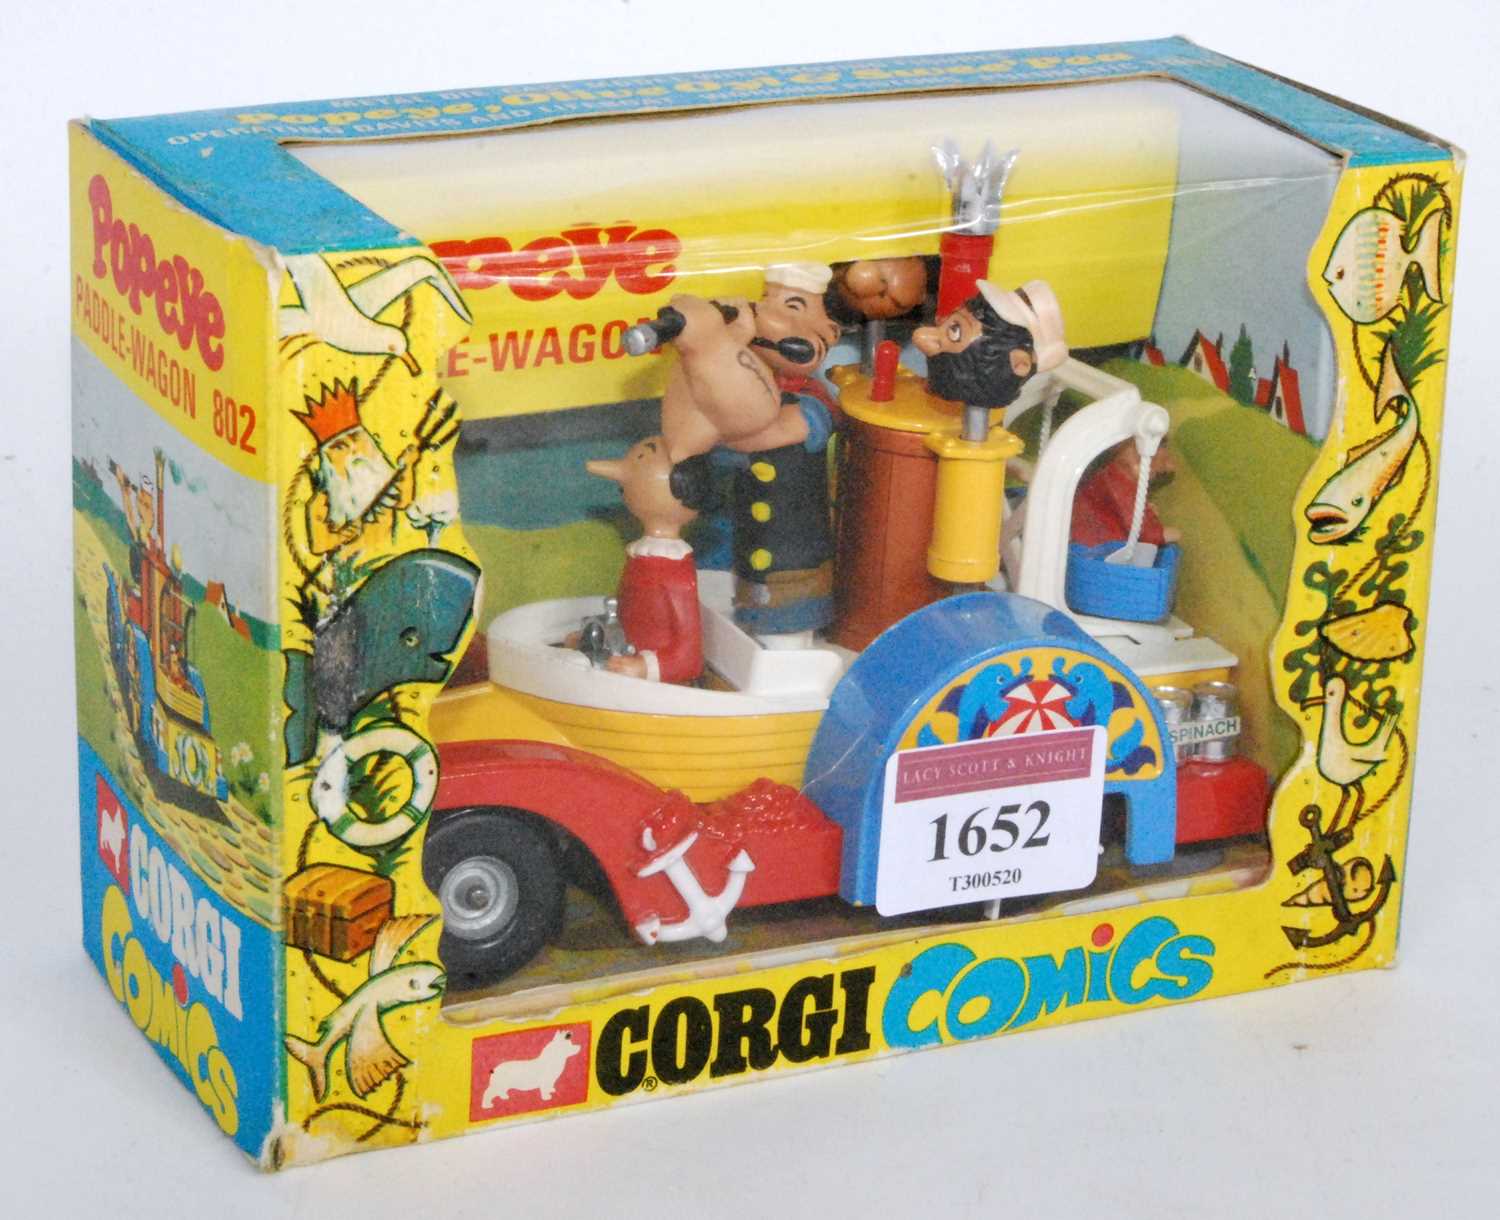 A Corgi Toys No. 802 Popeye's Paddle Wagon, finished in yellow with red chassis, white upper body